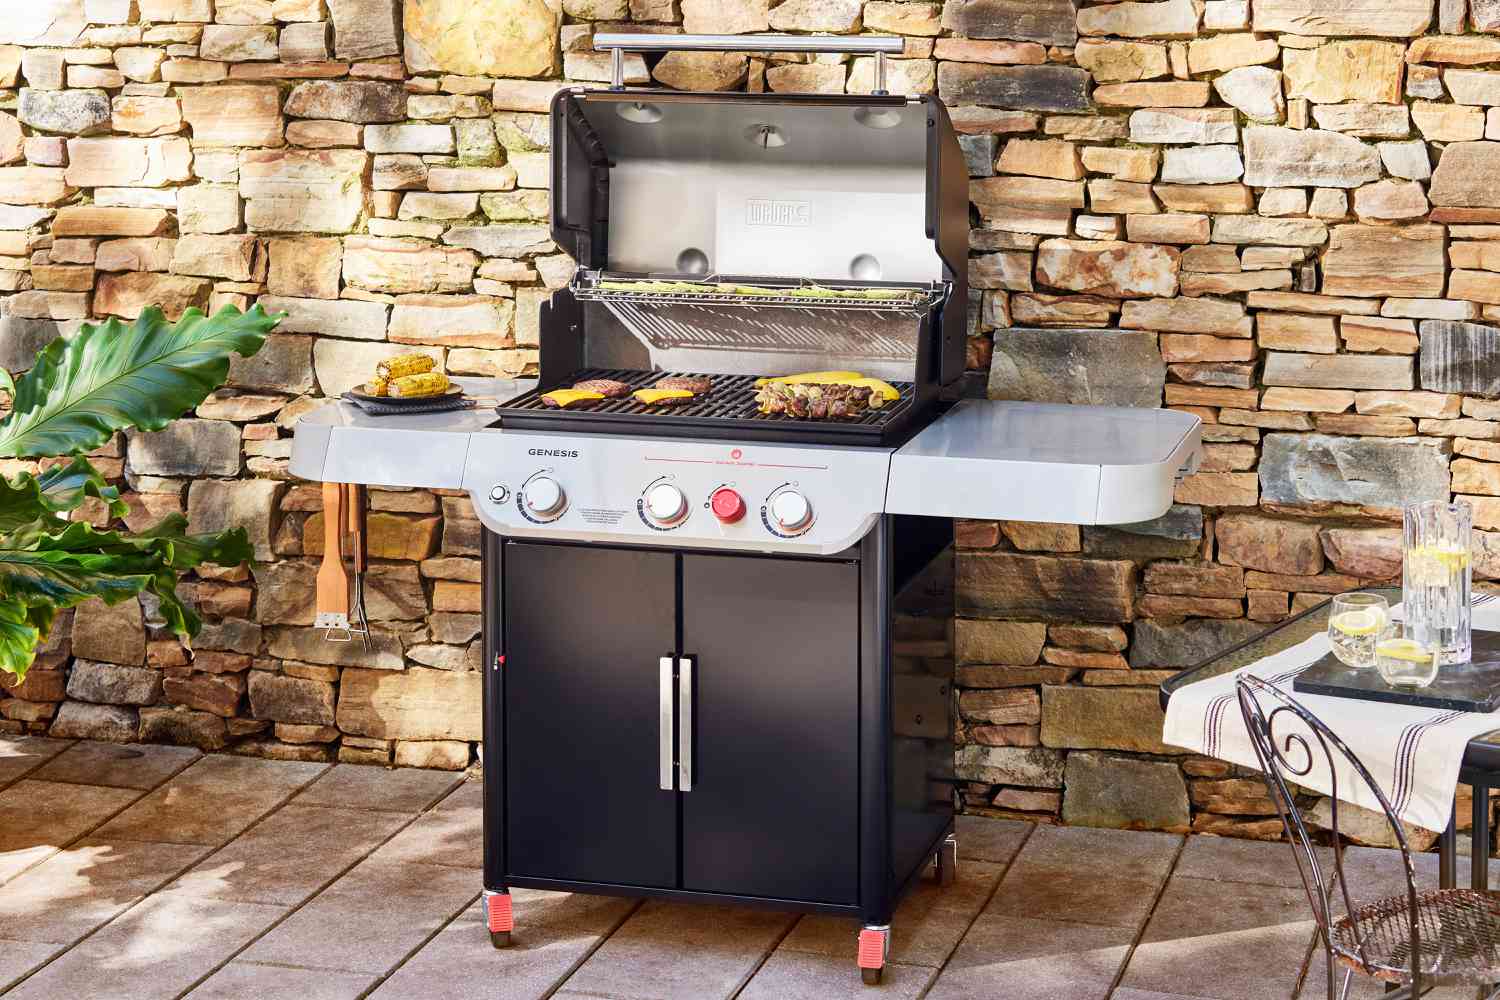 When to replace a grill – discover the signs that it’s time to get a new BBQ